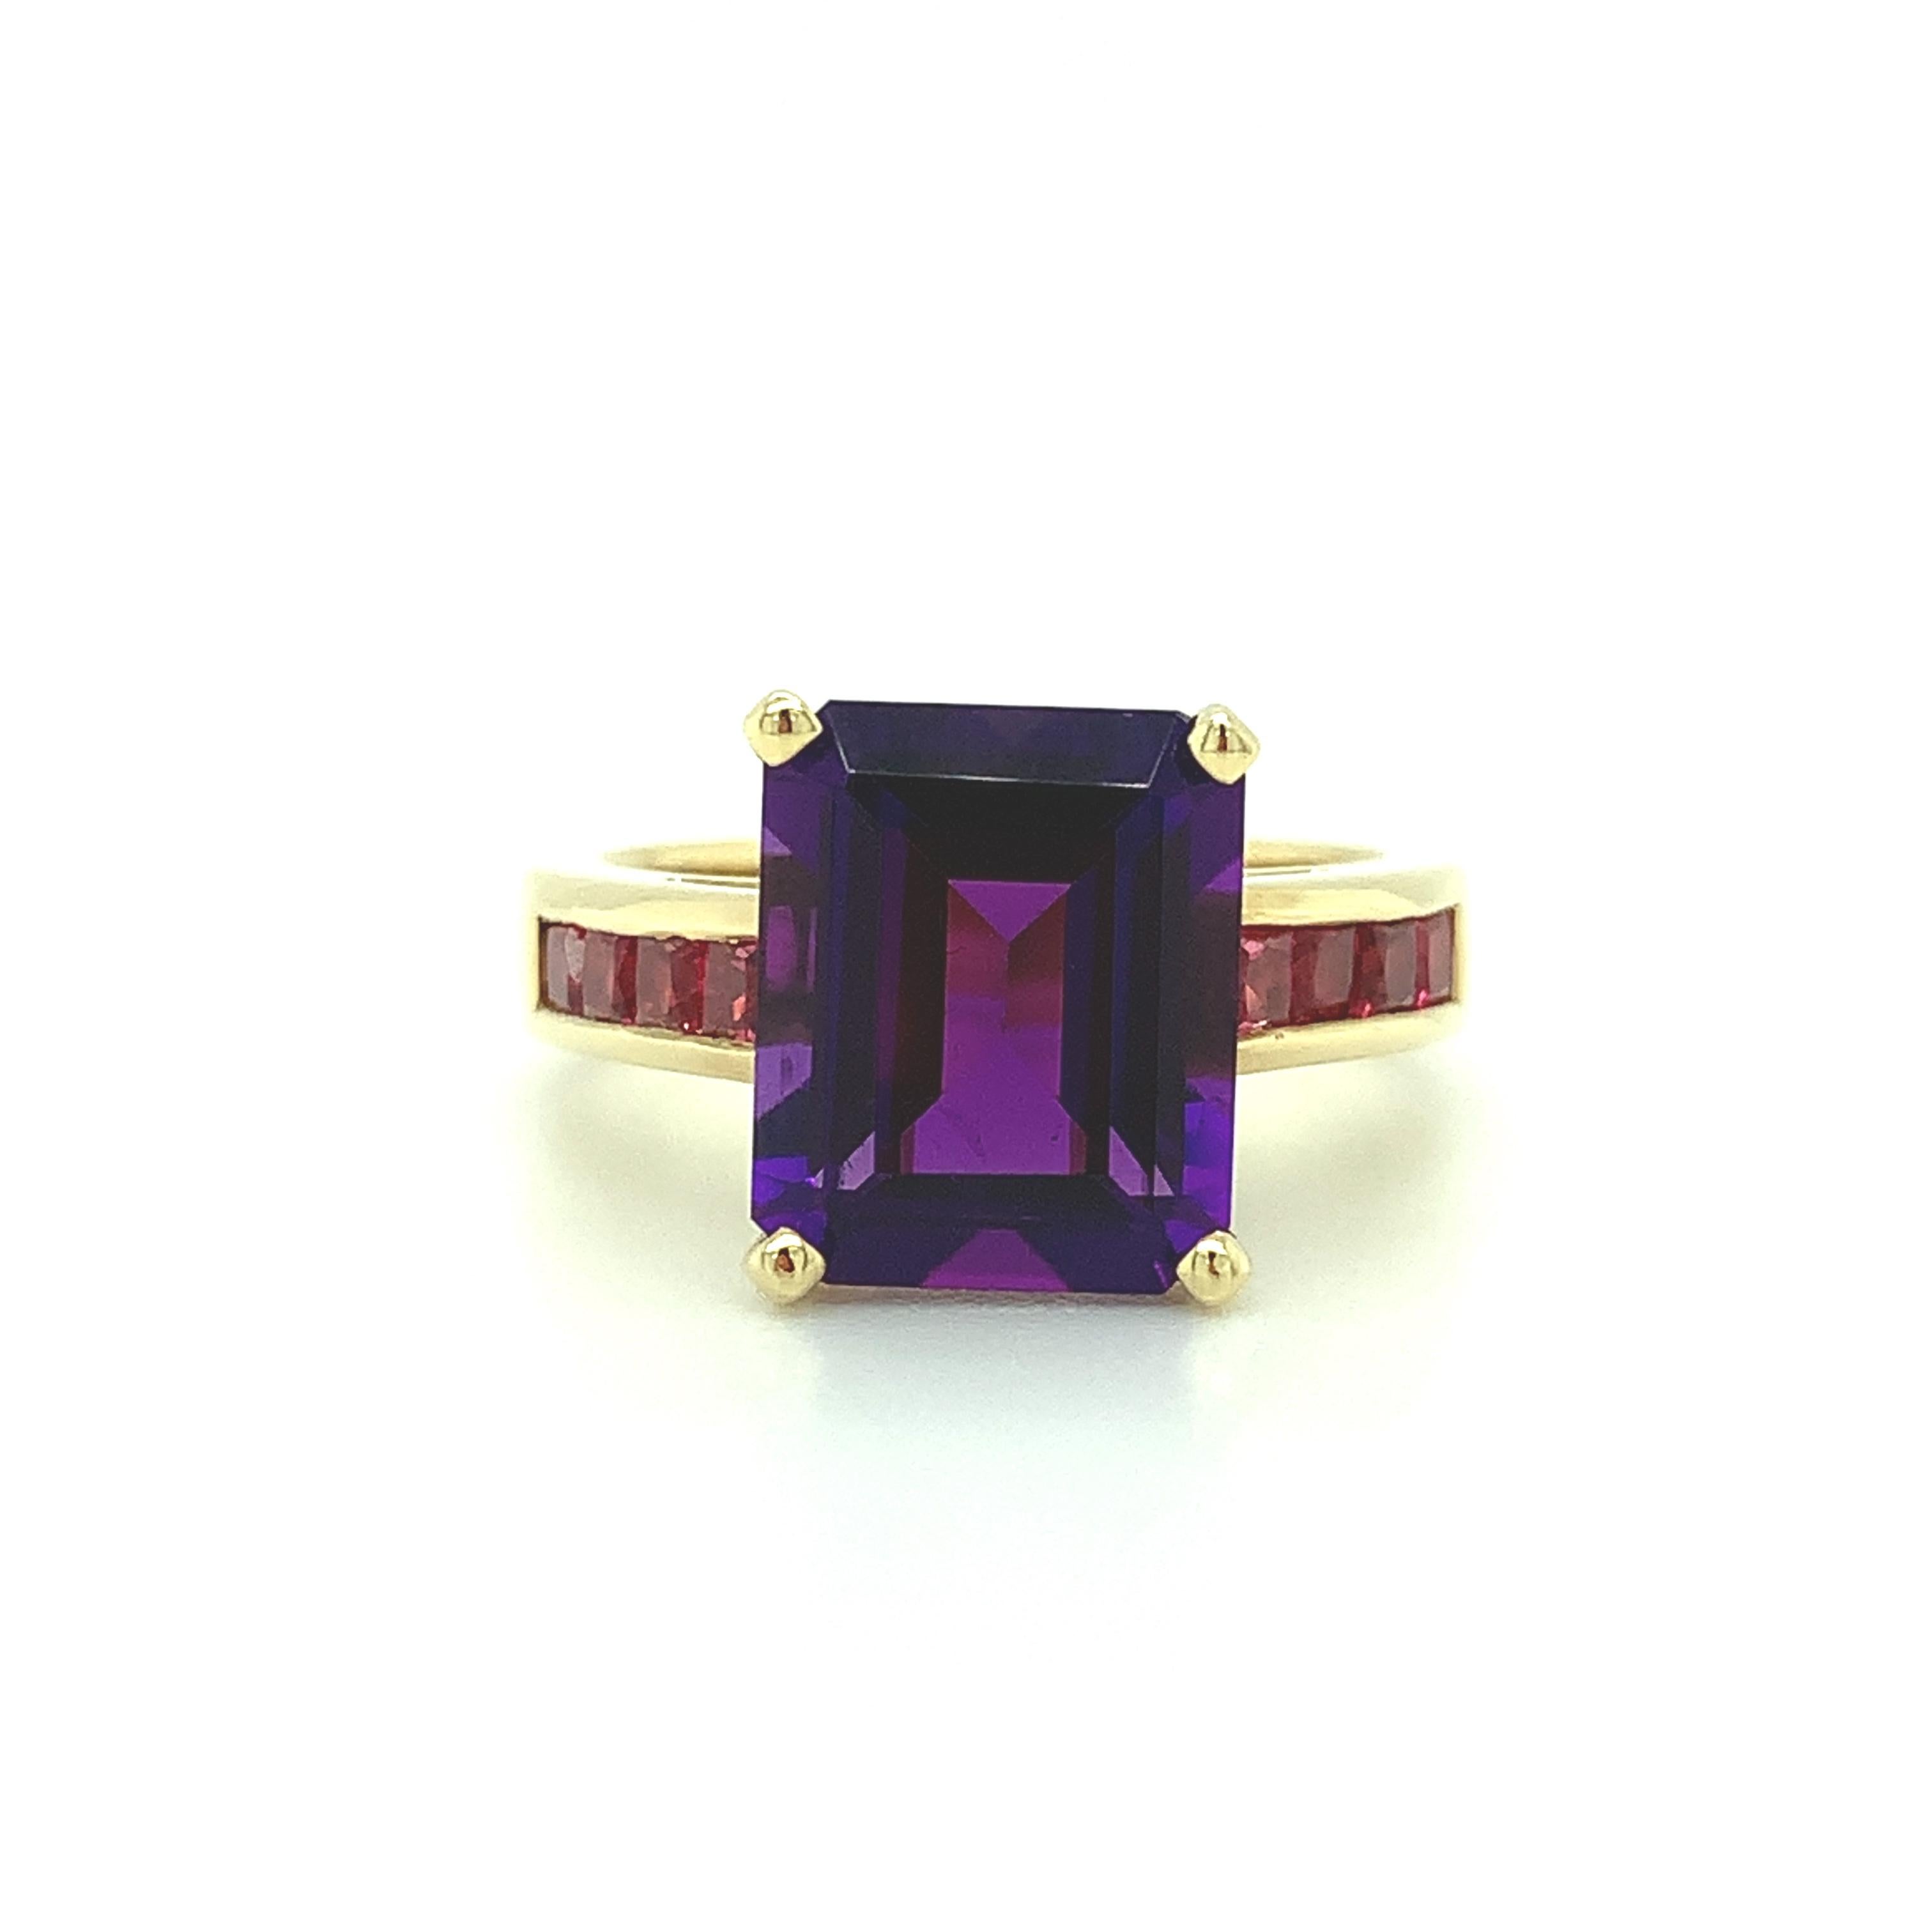 A beautiful emerald-cut, royal purple amethyst is combined with channel-set, bright princess-cut pink spinels in this stunning 18k yellow gold cocktail ring. The fuchsia pink flashes within the amethyst are highlighted by the sparkling fuchsia color